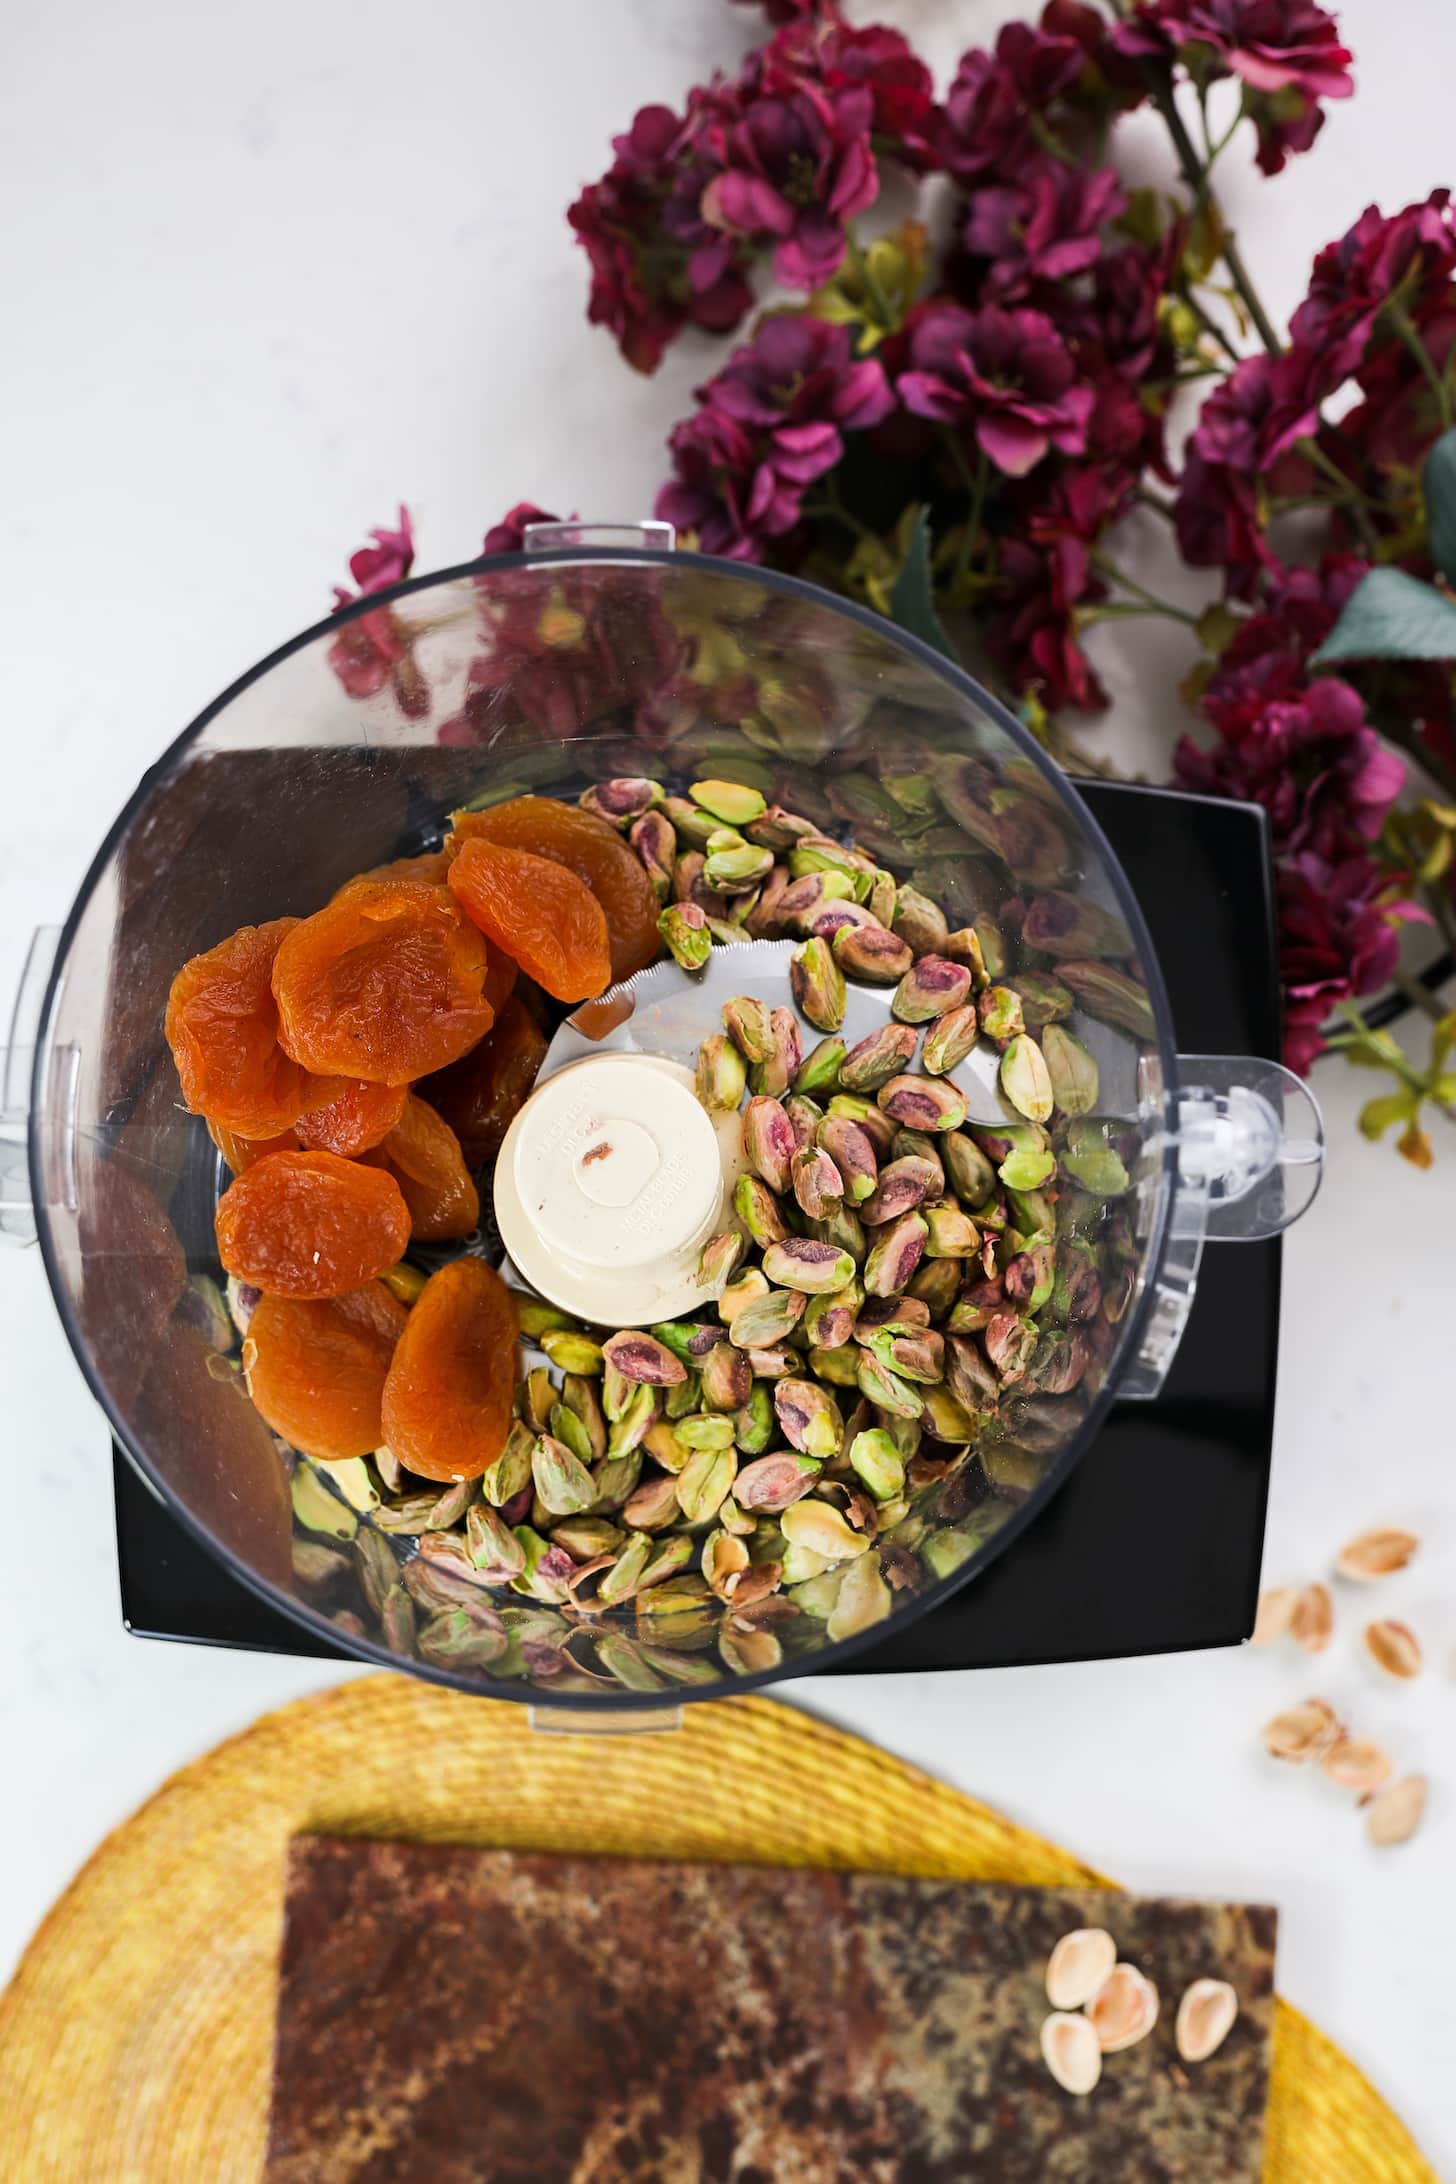 food processor containing pistachios and dried apricots with flowers on one side of a worktop surface.